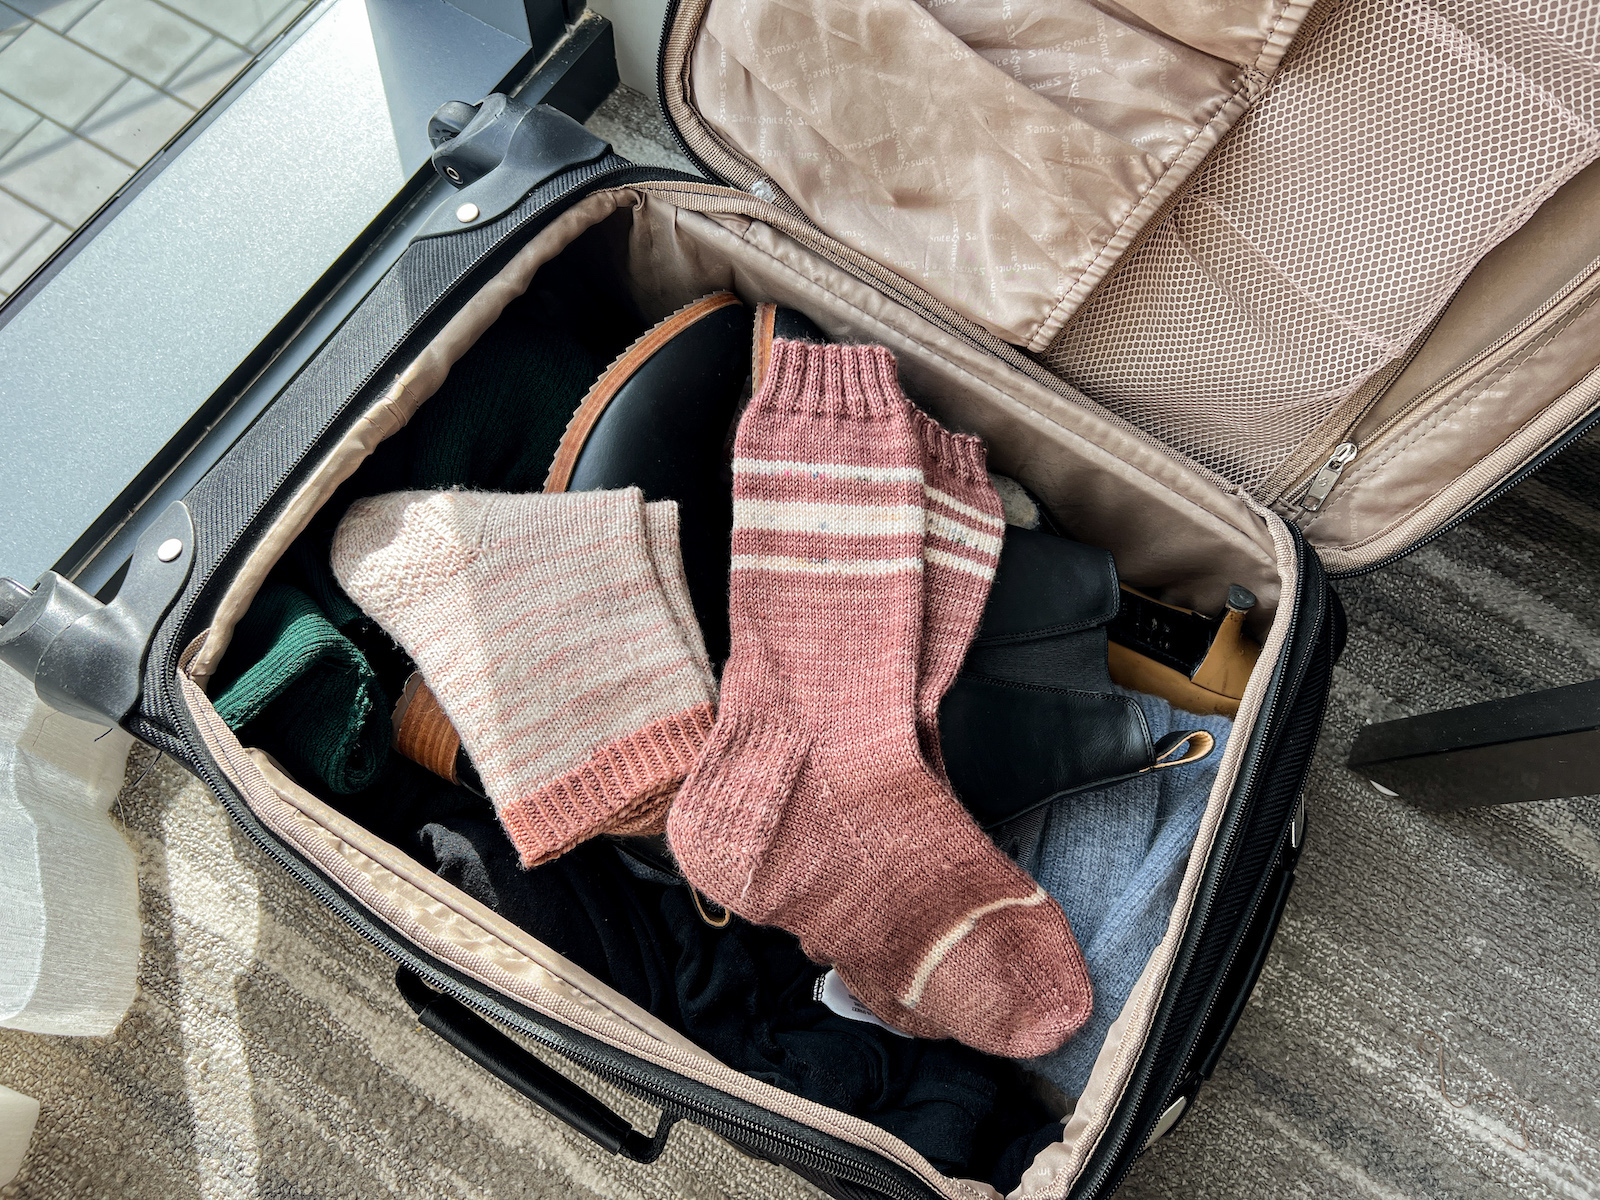 Two pairs of pink, hand-knit socks sitting in the top of an open suitcase.